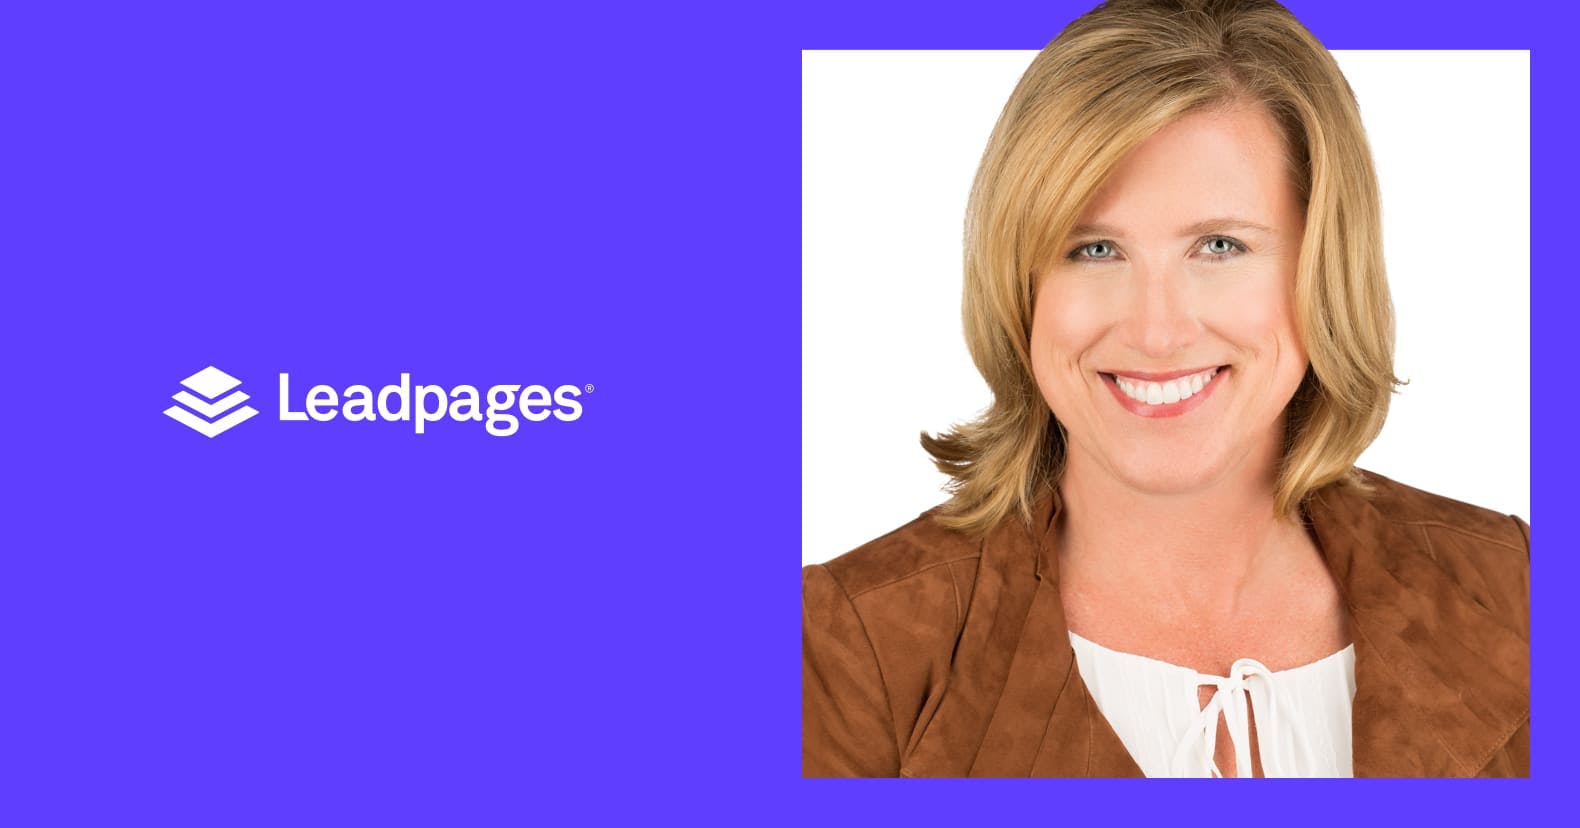 Leadpages Appoints Jeanette Dorazio as CEO